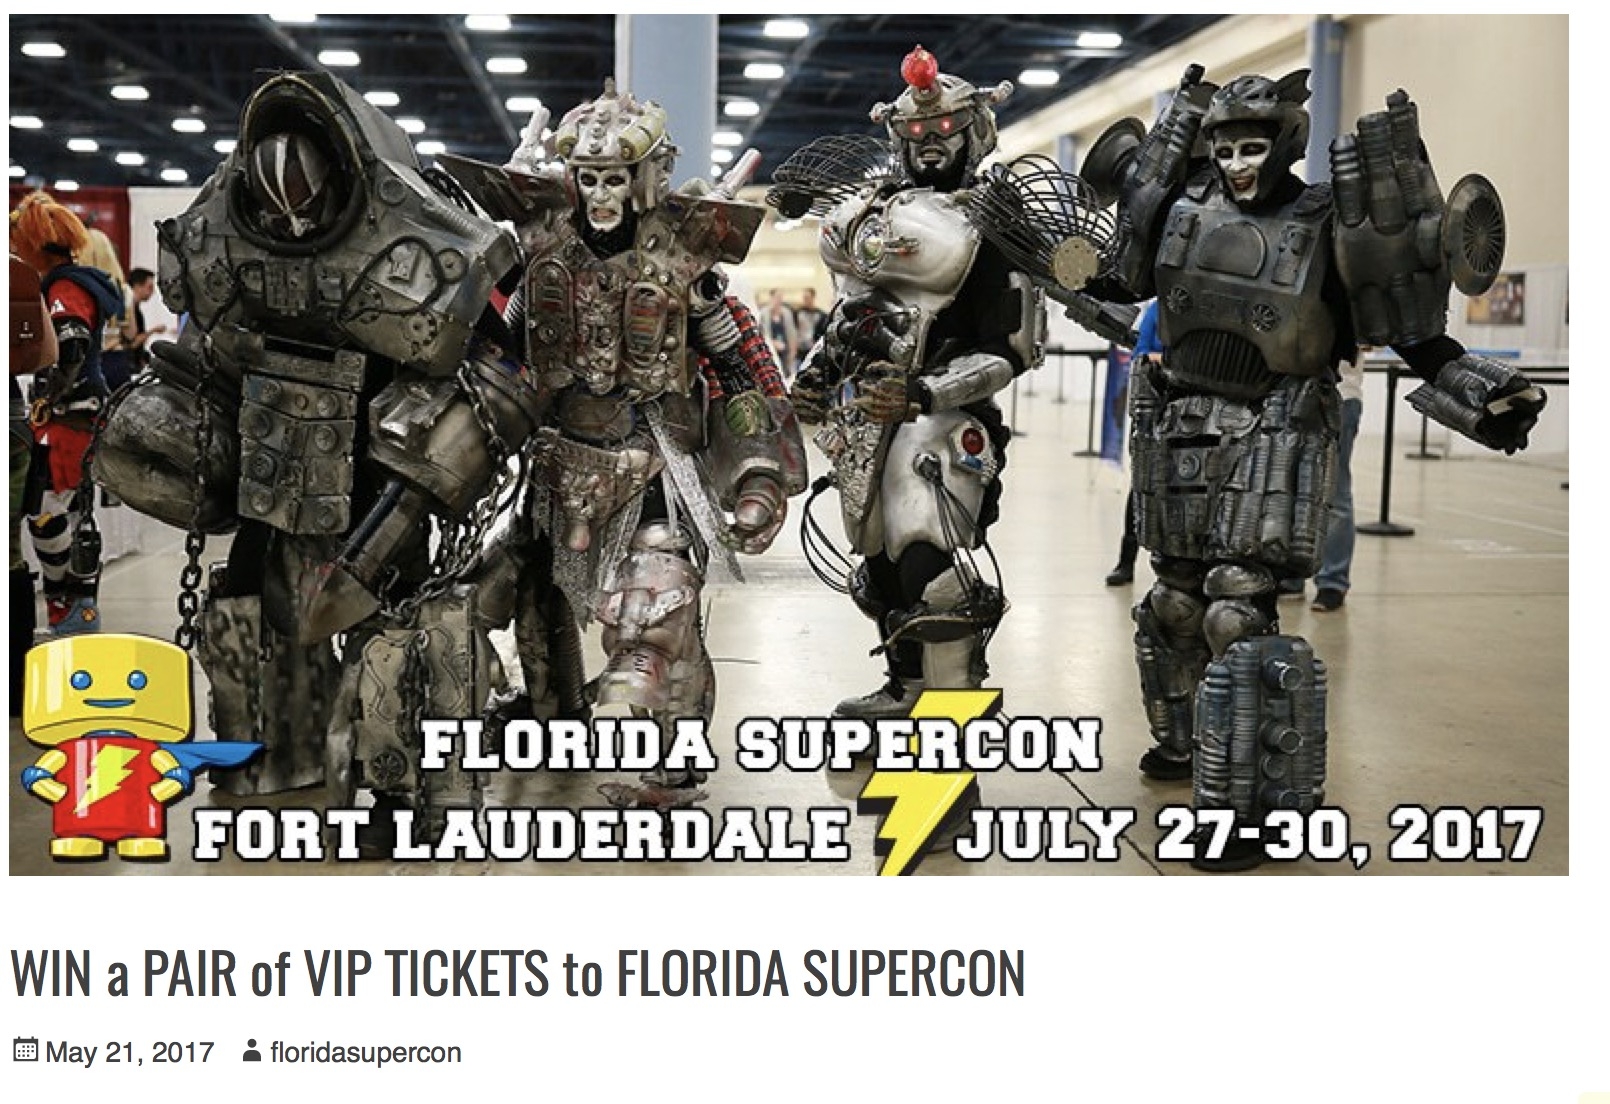 WIN a PAIR of VIP TICKETS to FLORIDA SUPERCON